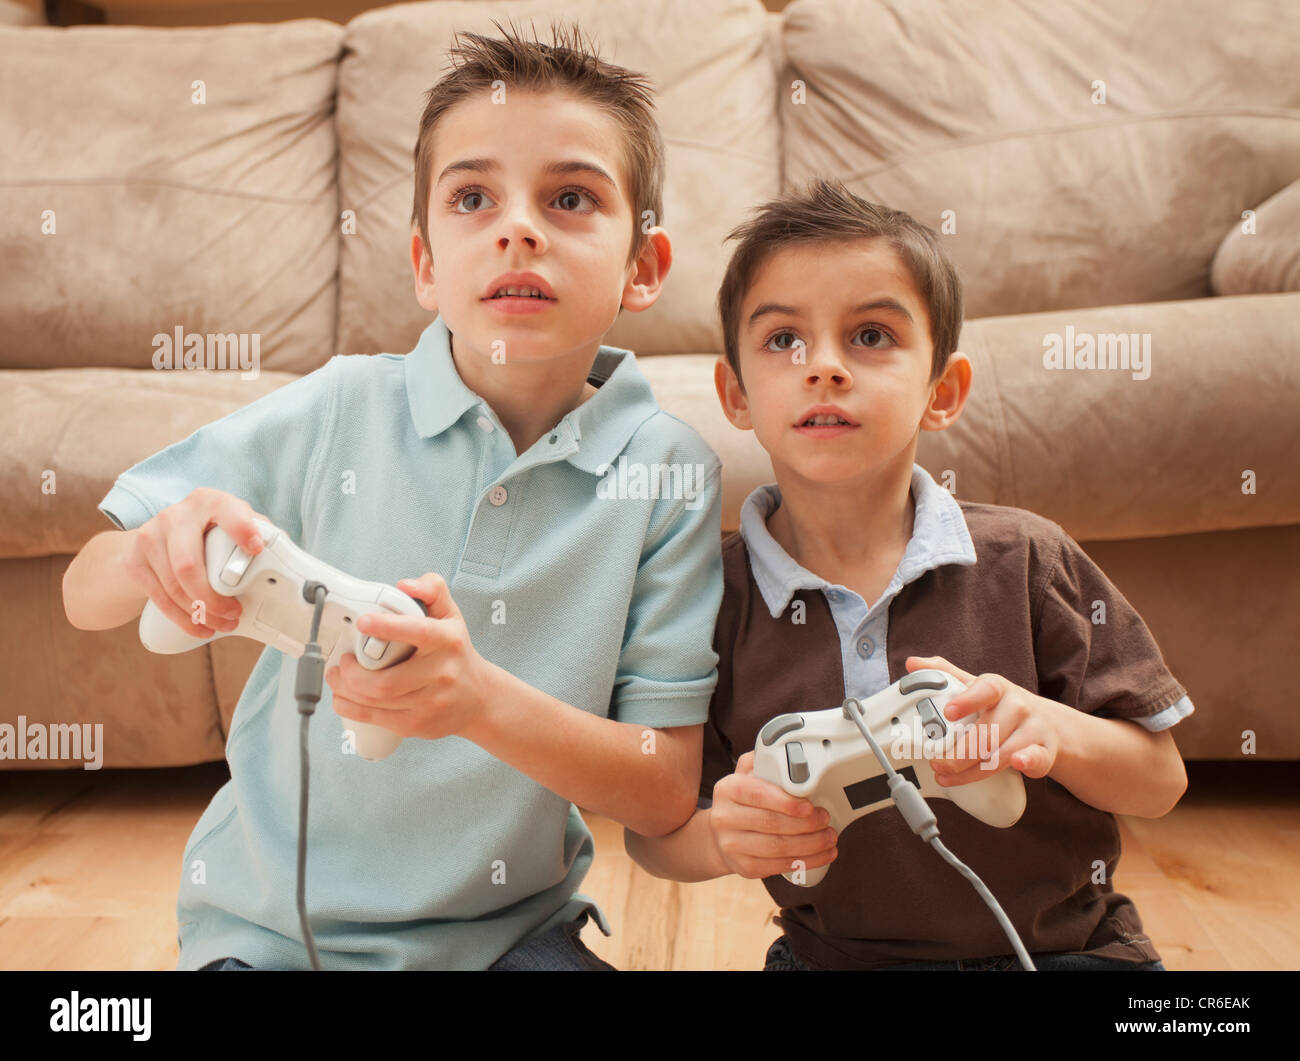 boys playing video games